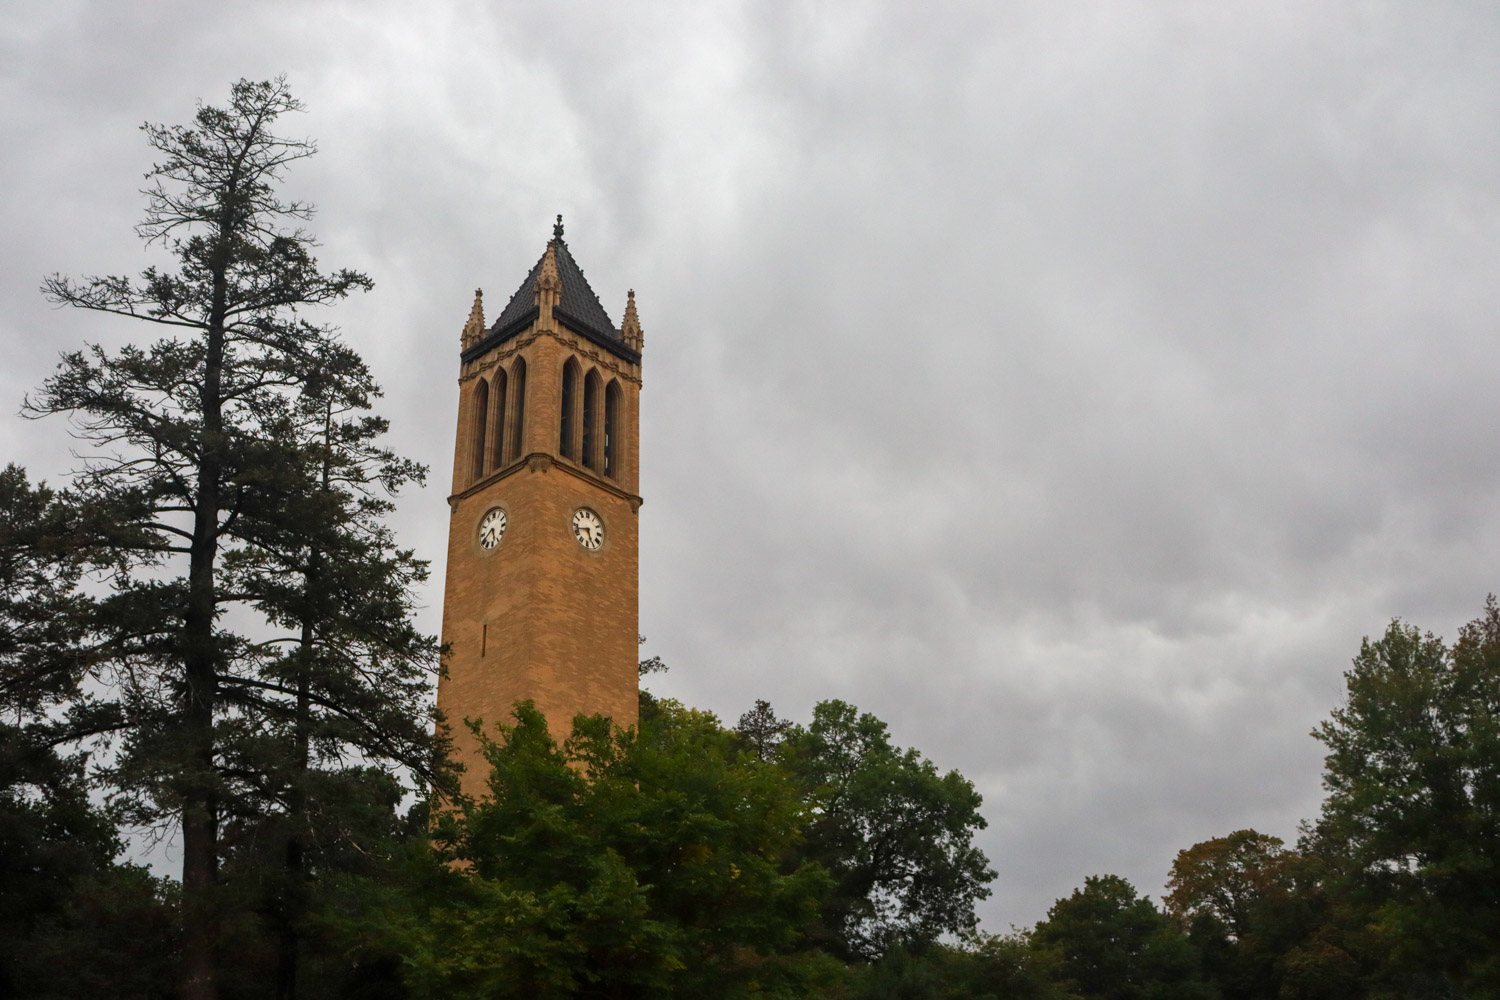 Completed in 1898, the Campanile is a memorial to Margaret Stanton, the first Dean of Women. Sept. 19, 2023.